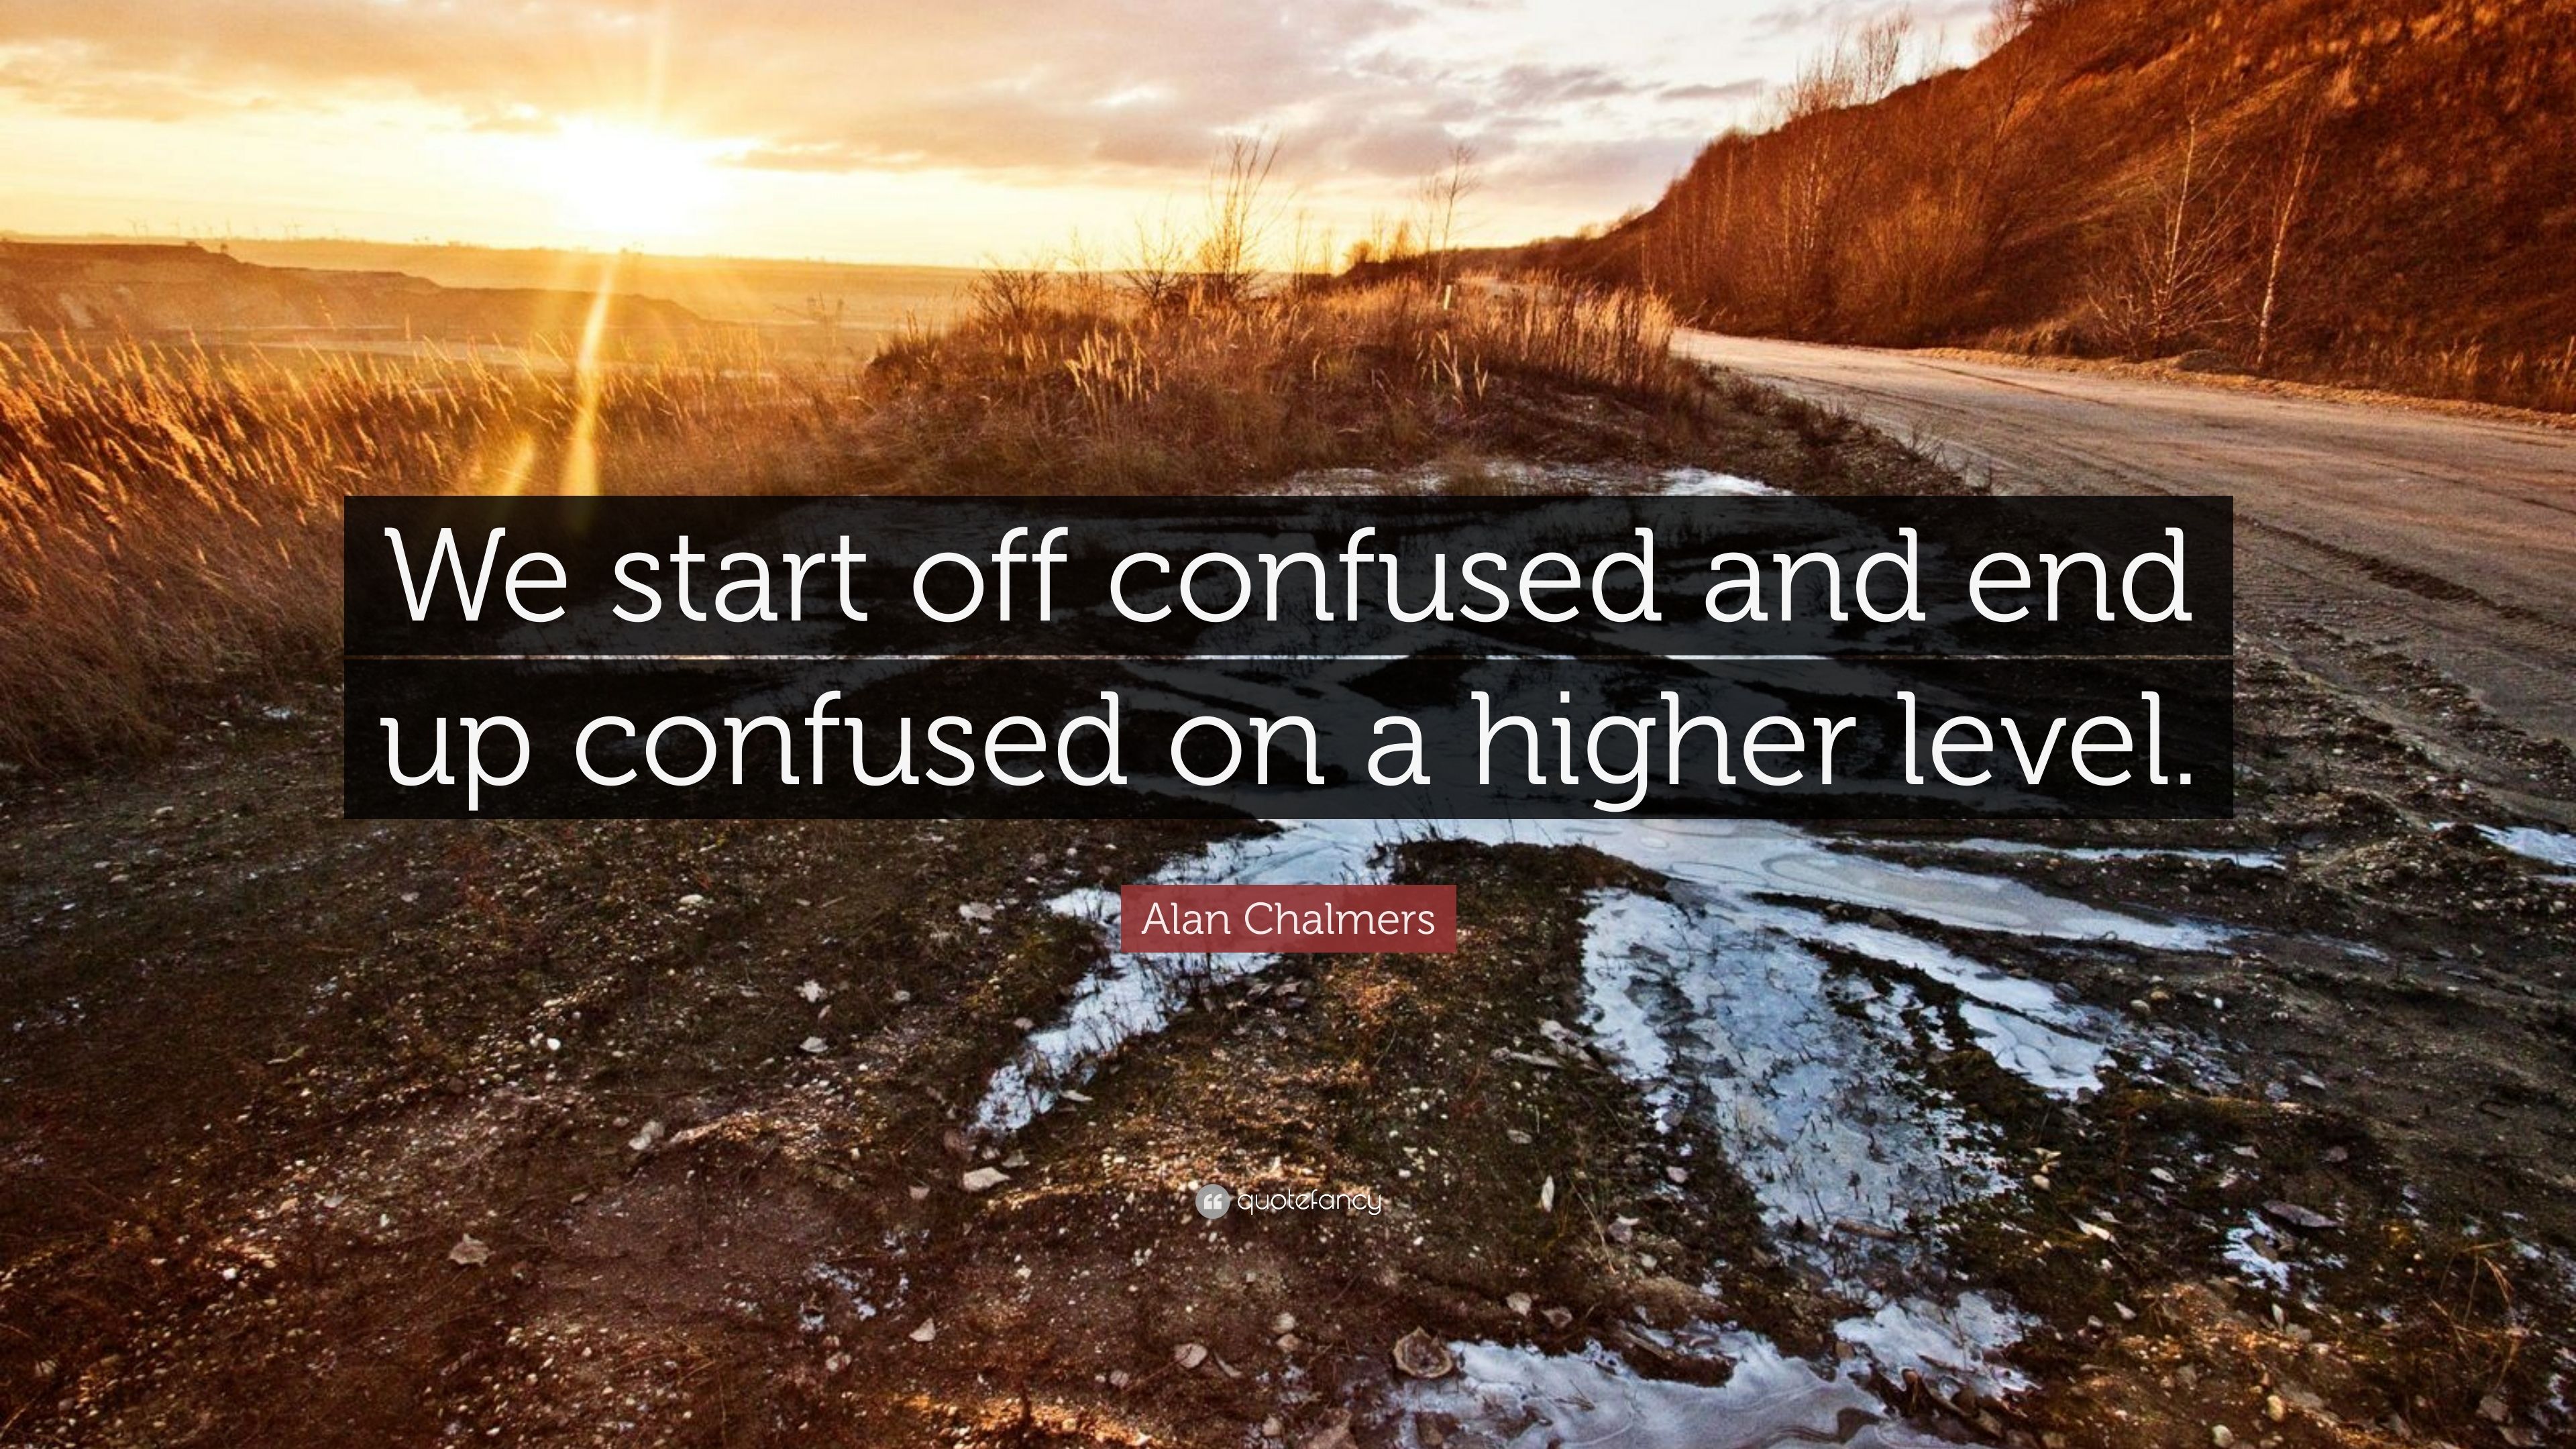 Alan Chalmers Quote: “We start off confused and end up confused